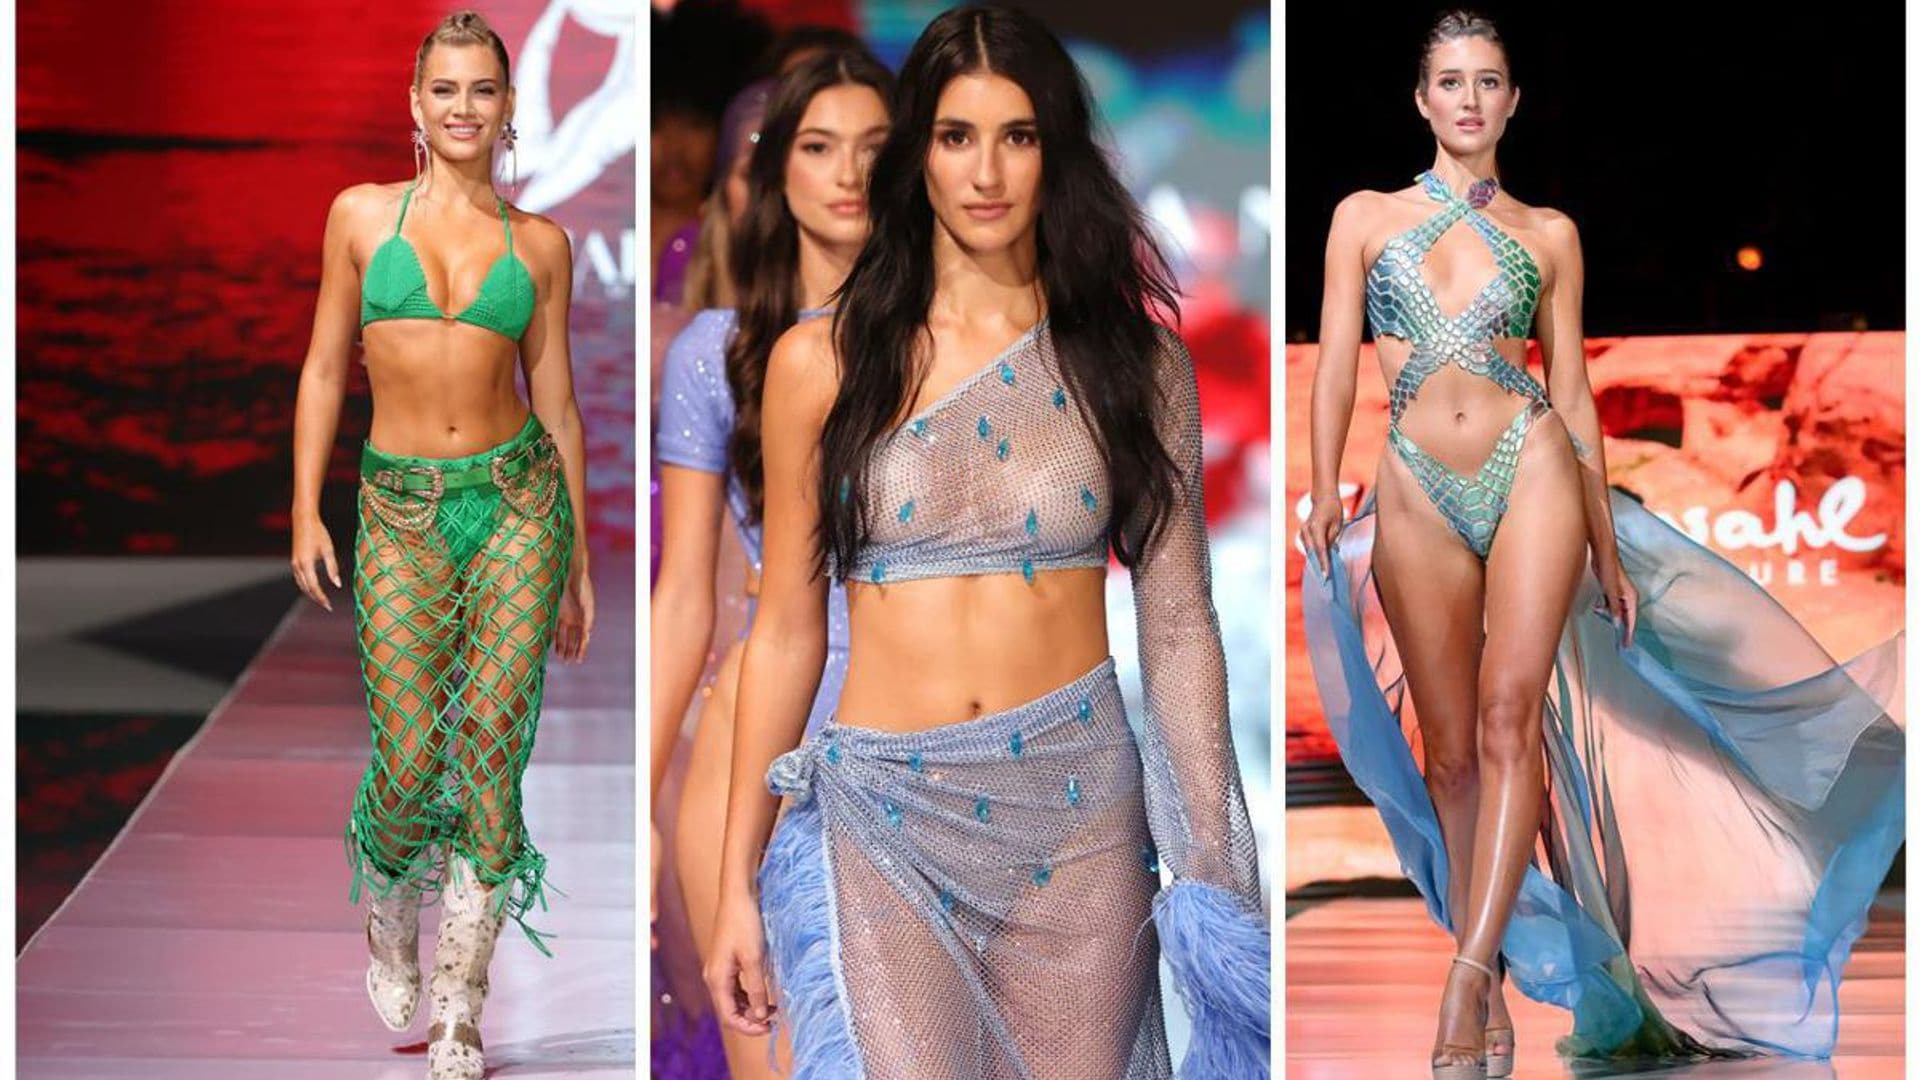 ‘Miami Swim Week – The Shows’ turns up the heat: See the hottest trends